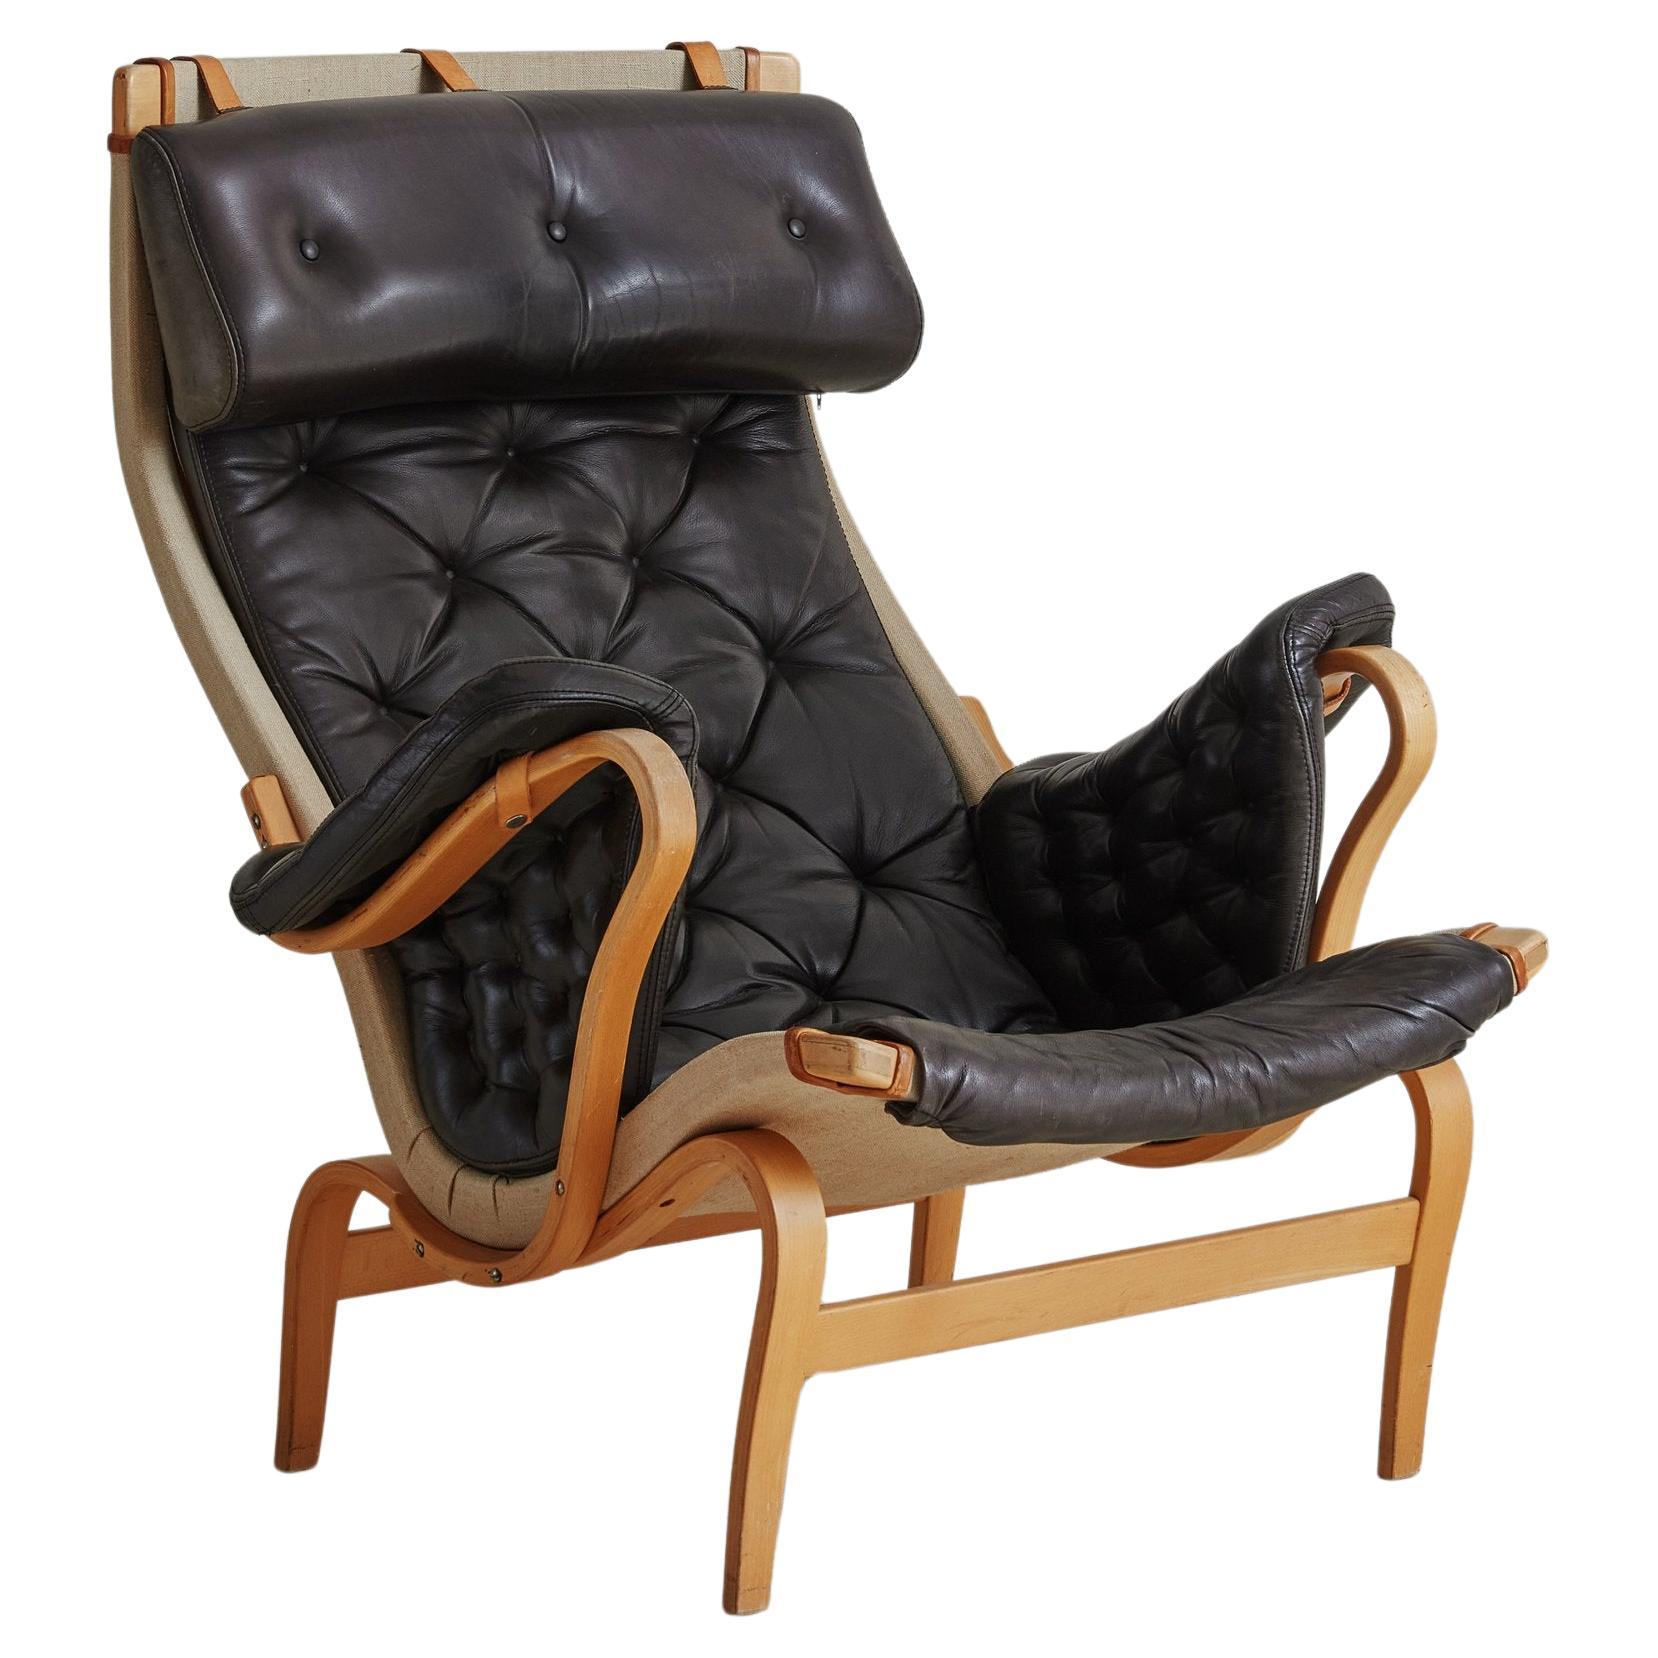 Black Leather Tufted 'Pernilla' Armchair by Bruno Mathsson for DUX, Sweden 1960s For Sale